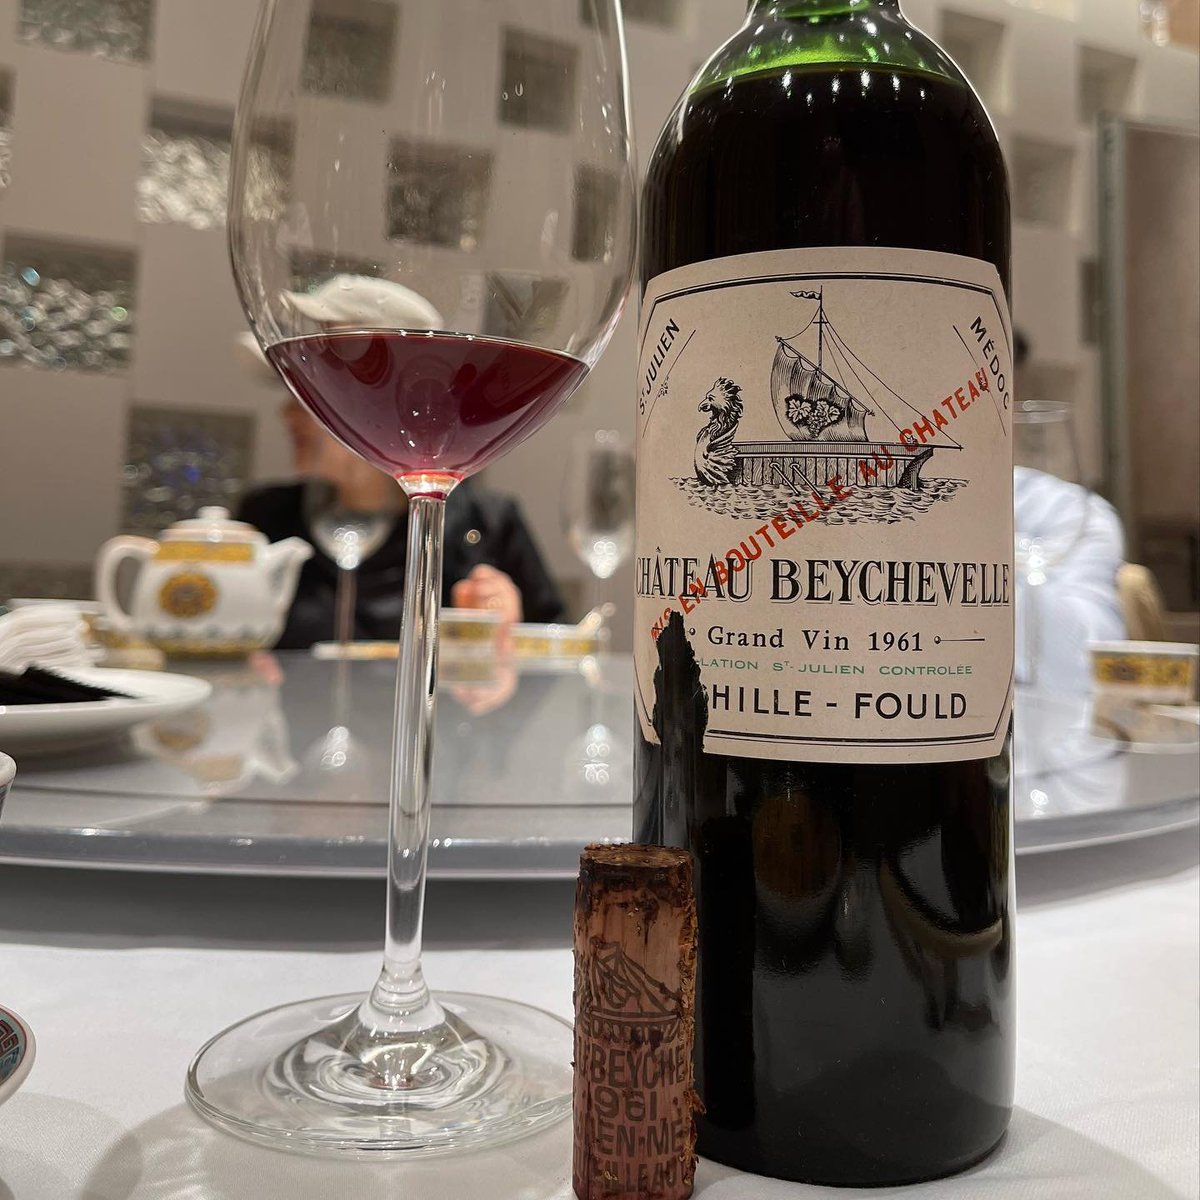 Ch Beychevelle 1961, evocative and captivating aroma, dried tobacco, earthy herbs; smooth and lively on the palate with flavors of ripe fruit, olives, soy and pickled vegetables; delicious and elegant finish; this has a lot of life left in it。@Ch Beychevelle